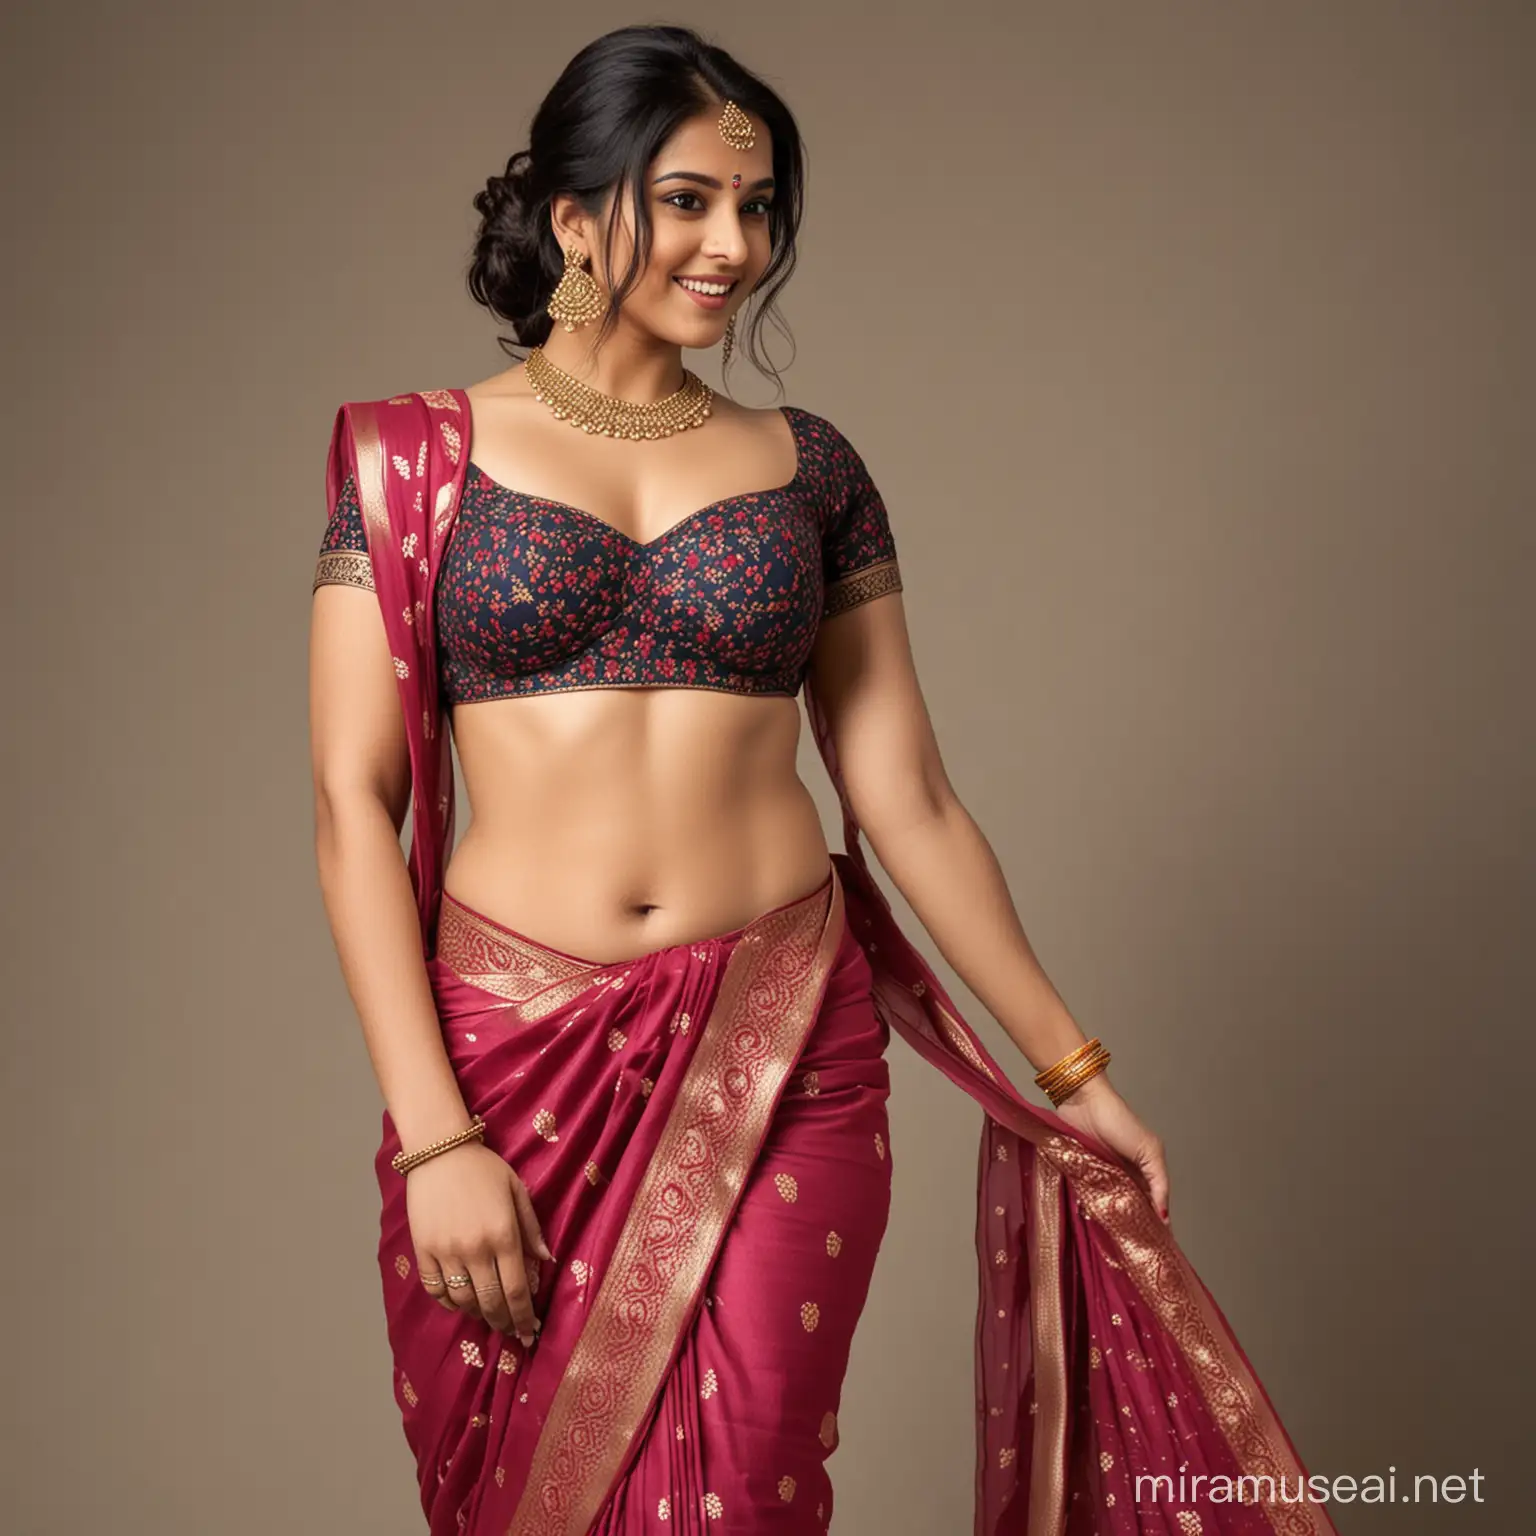 Traditional Indian Women Displaying Elegant Saree Styles with Emphasis on Curves